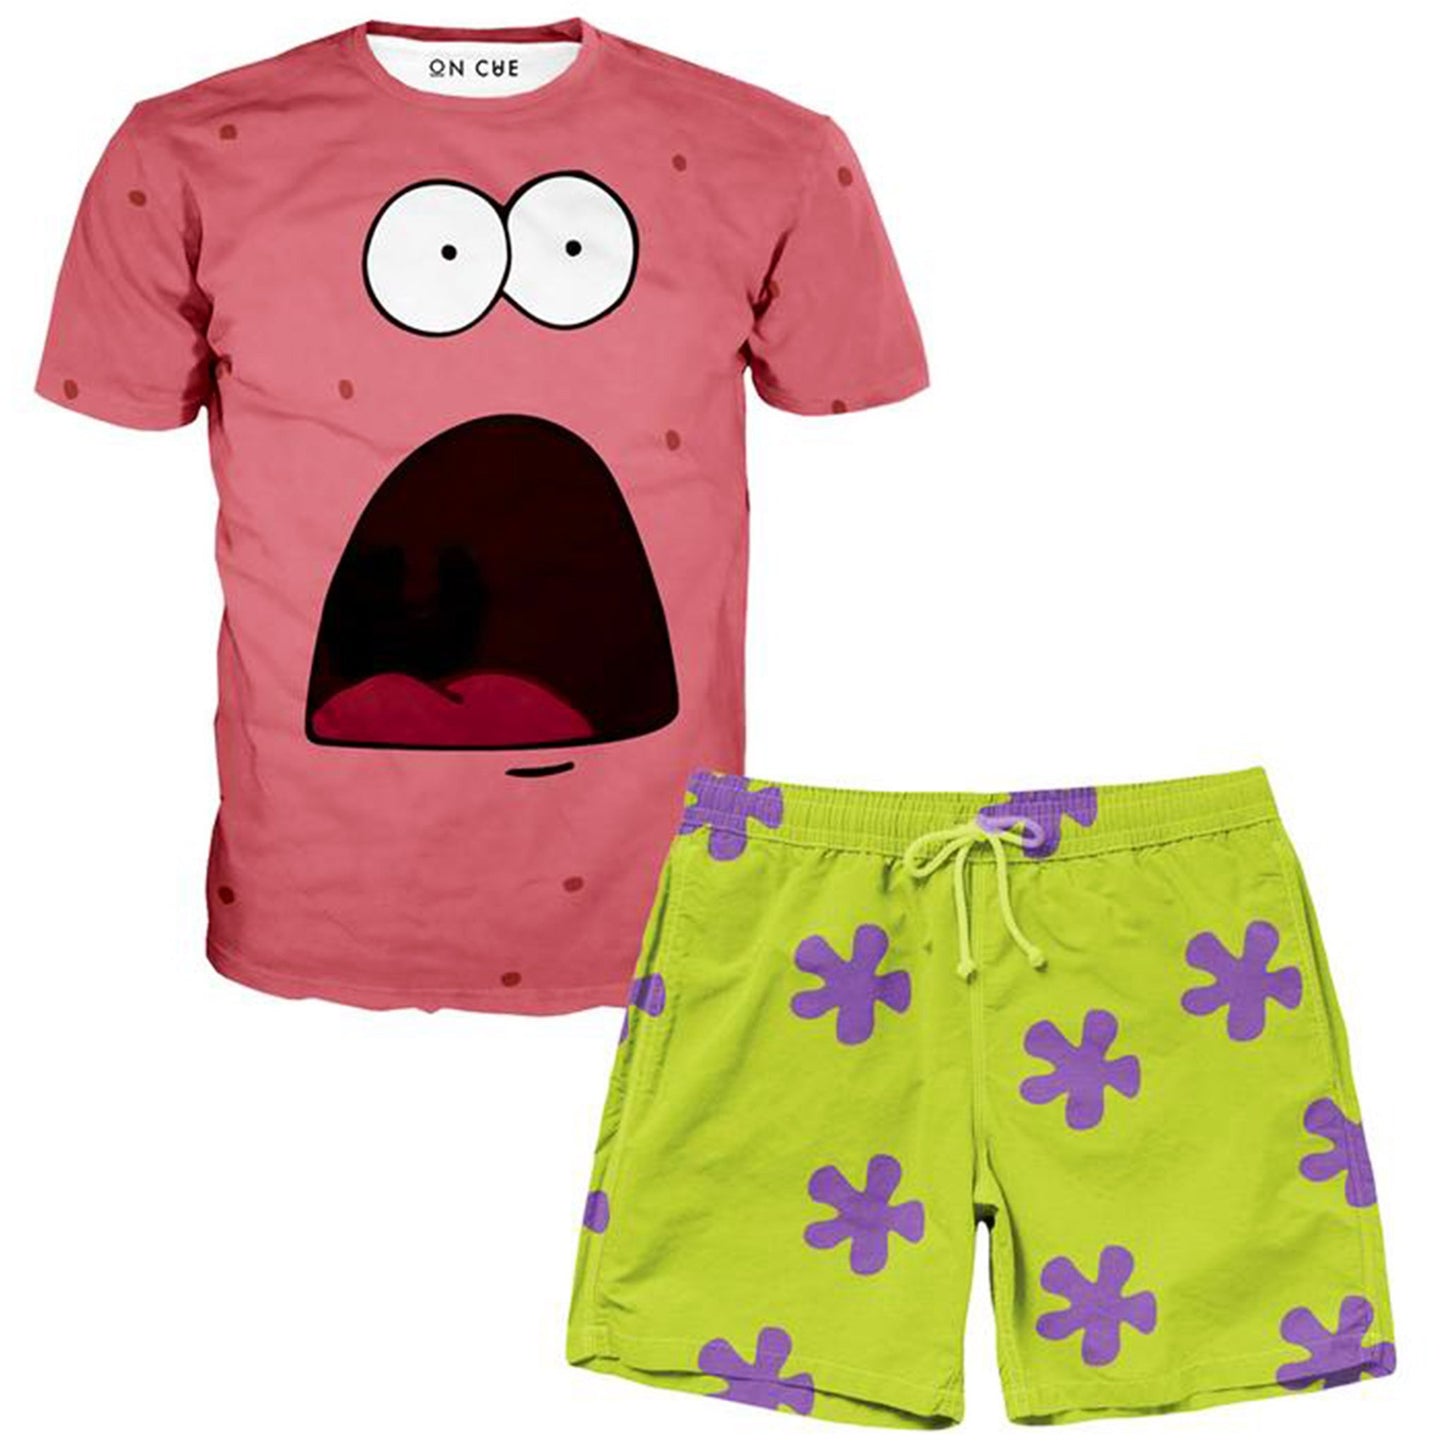 Patrick T-Shirt And Shorts Combo, On Cue Apparel, | iEDM